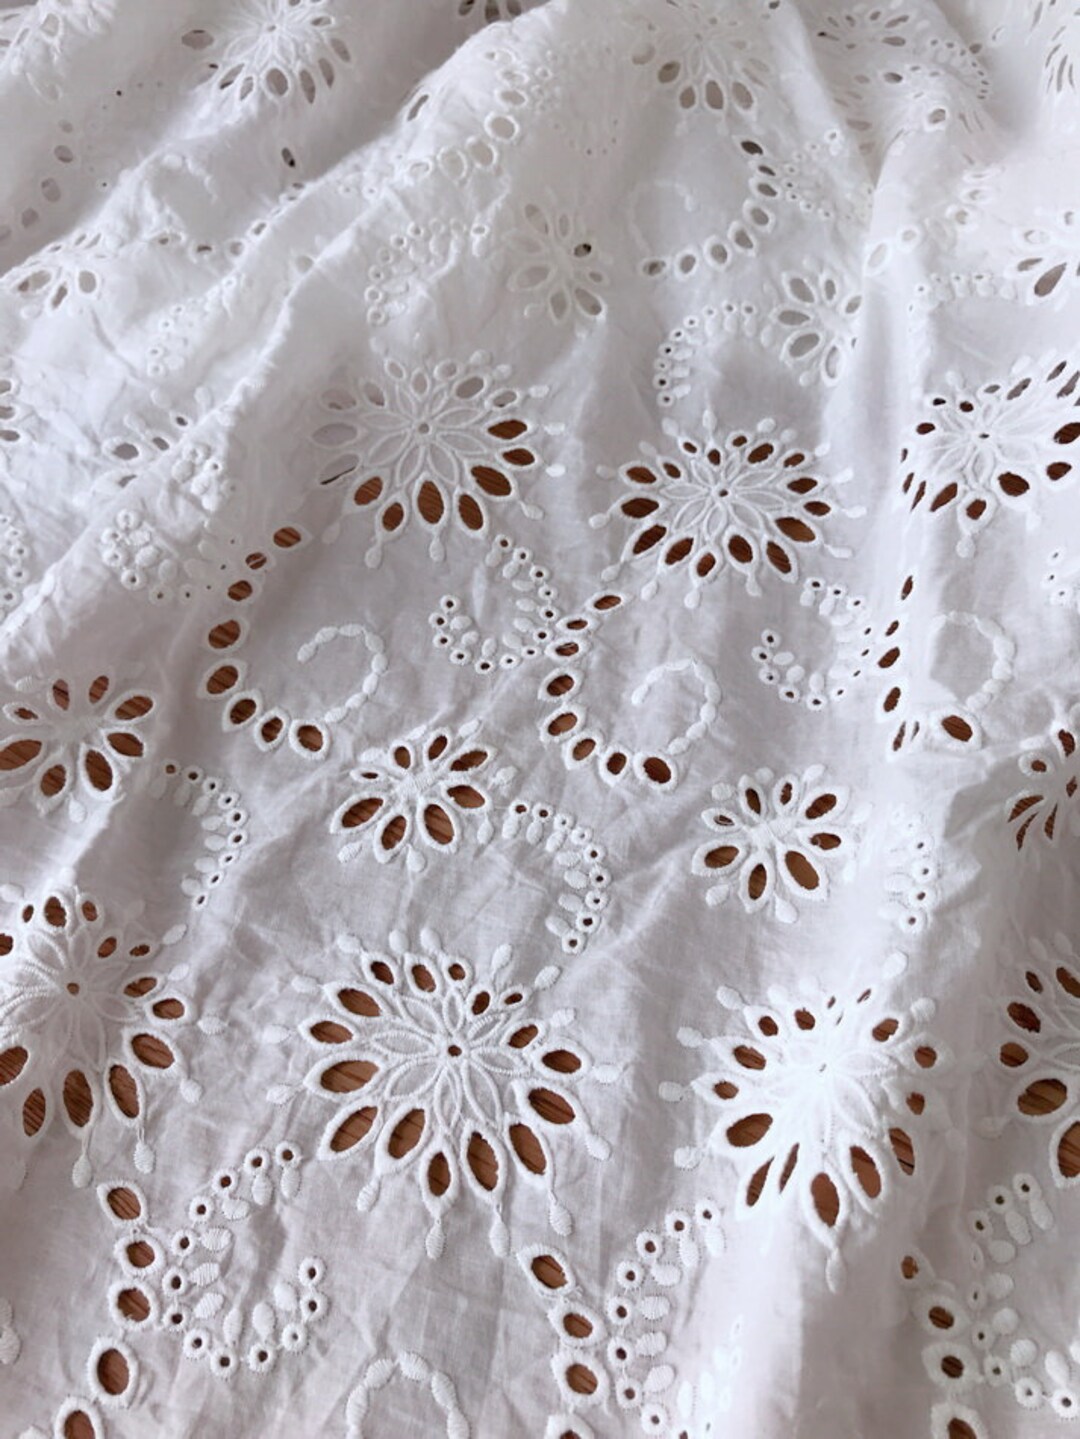 53 Wide Cotton Eyelet Flower Lace Fabric in off White - Etsy